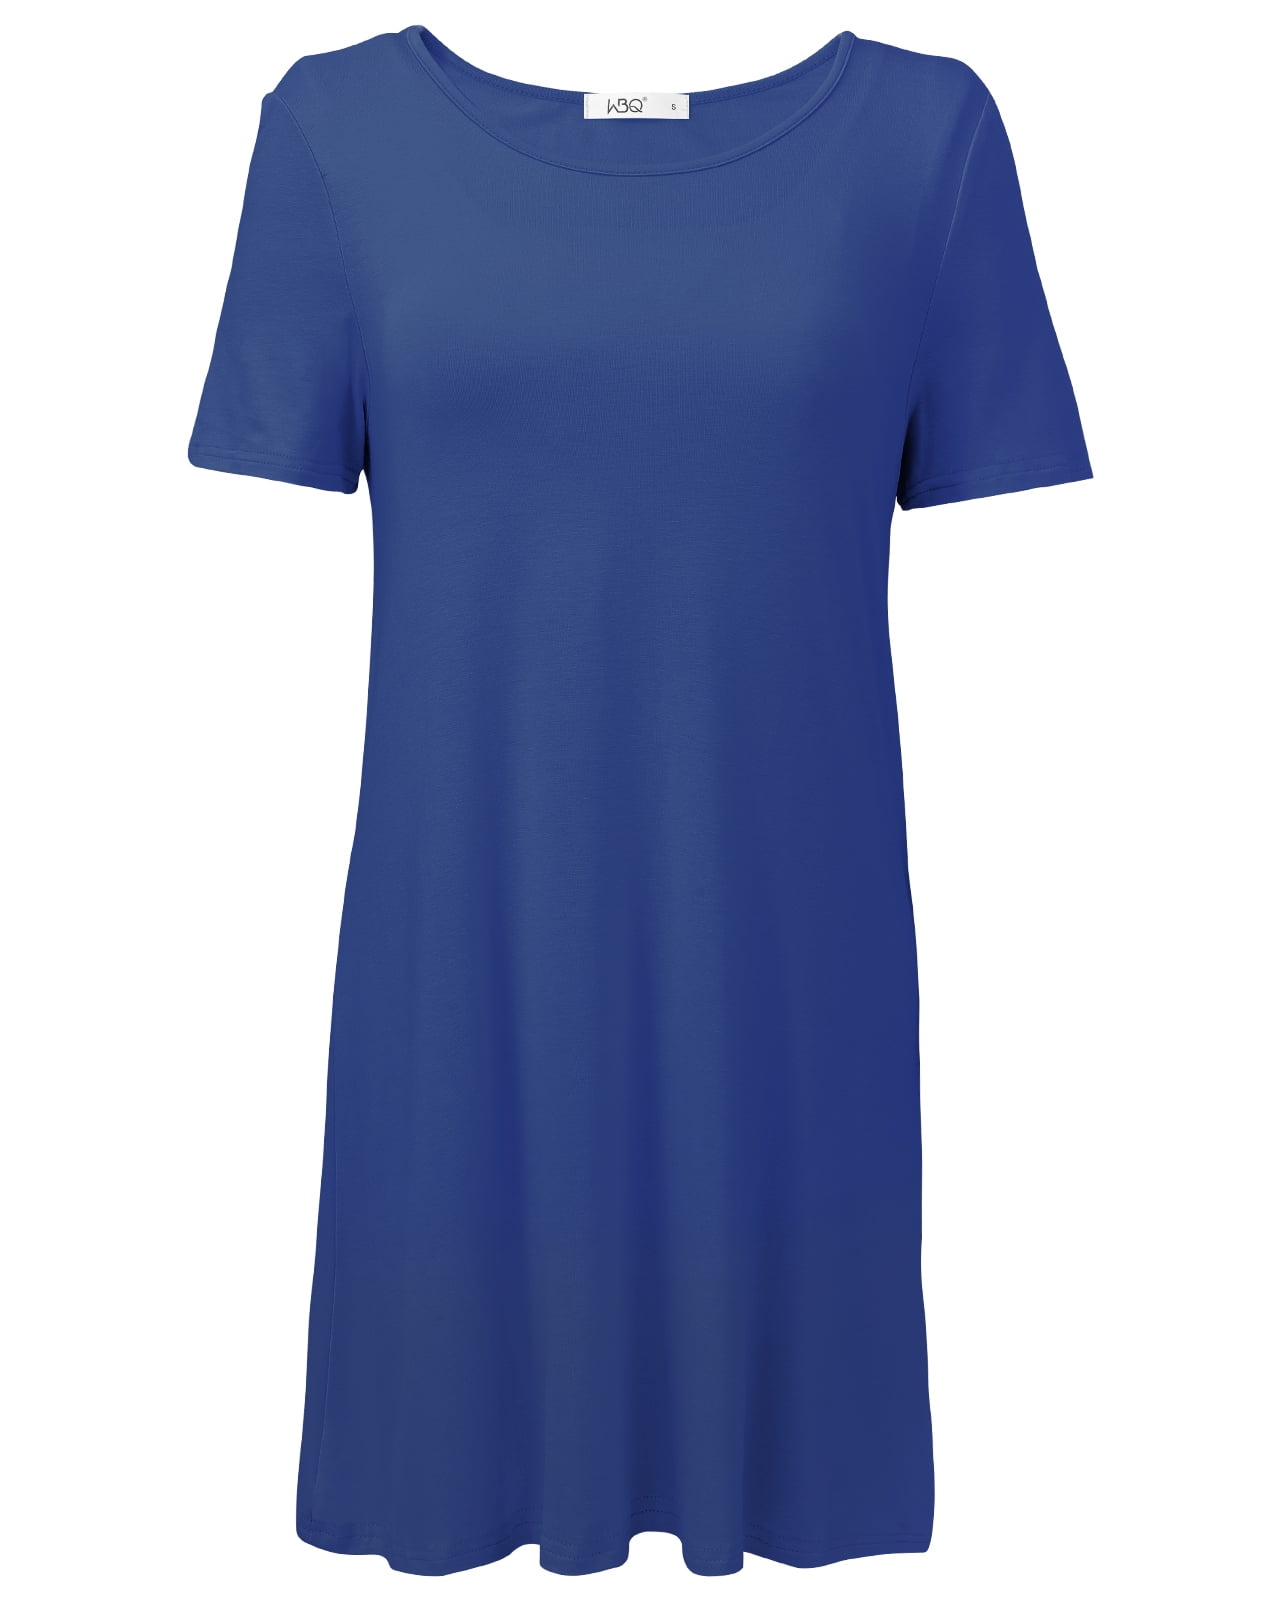 Women's Modal Nightgown with Built in Bra Short Sleeve Crewneck Super Soft  Sleepwear Nightshirt with Chest Pads Solid Color Nightdress Mid-Length  Pajamas Dress Loungewear S-2XL 